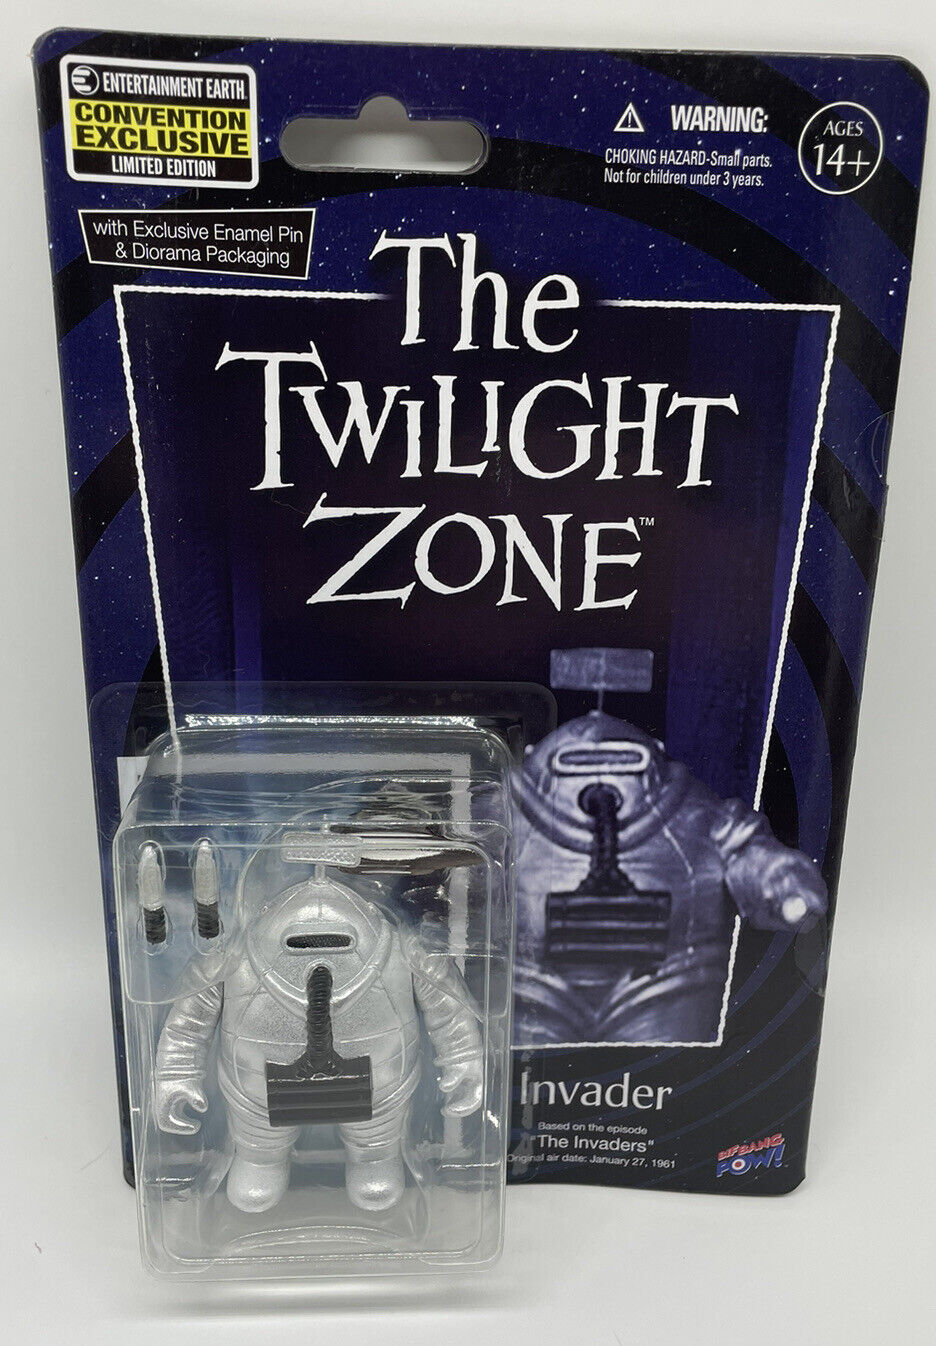 The Twilight Zone Invader Action Figure by Bif Bang Pow EE Convention Exclusive